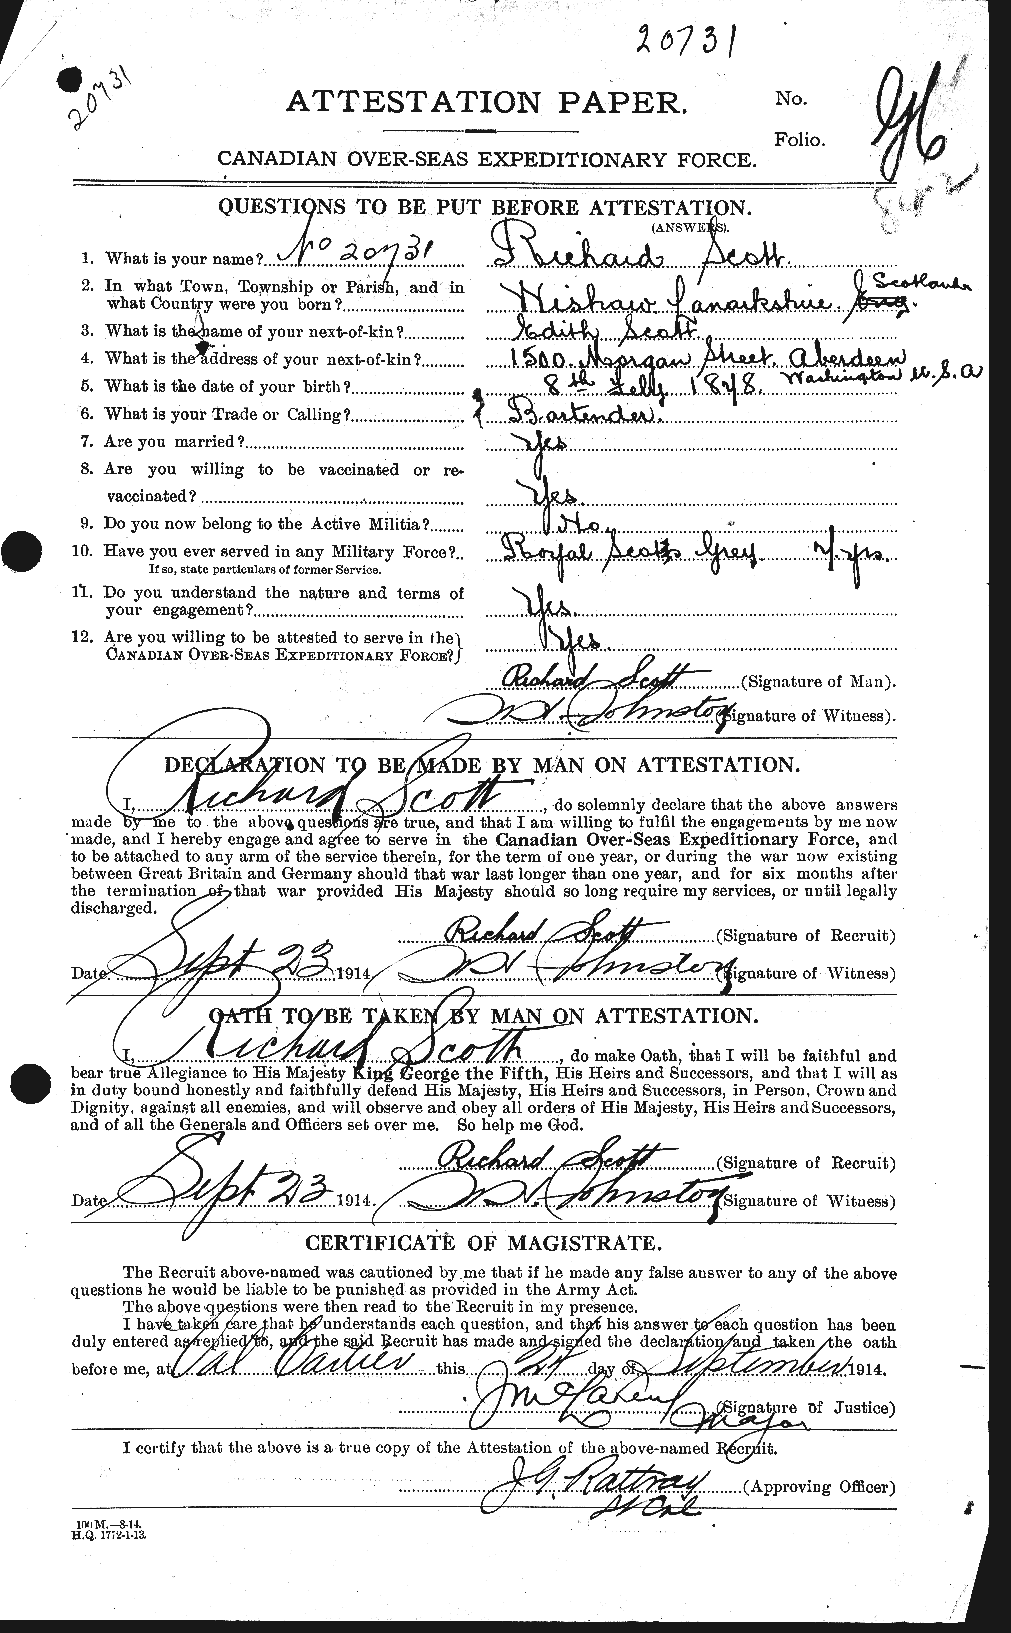 Personnel Records of the First World War - CEF 090182a